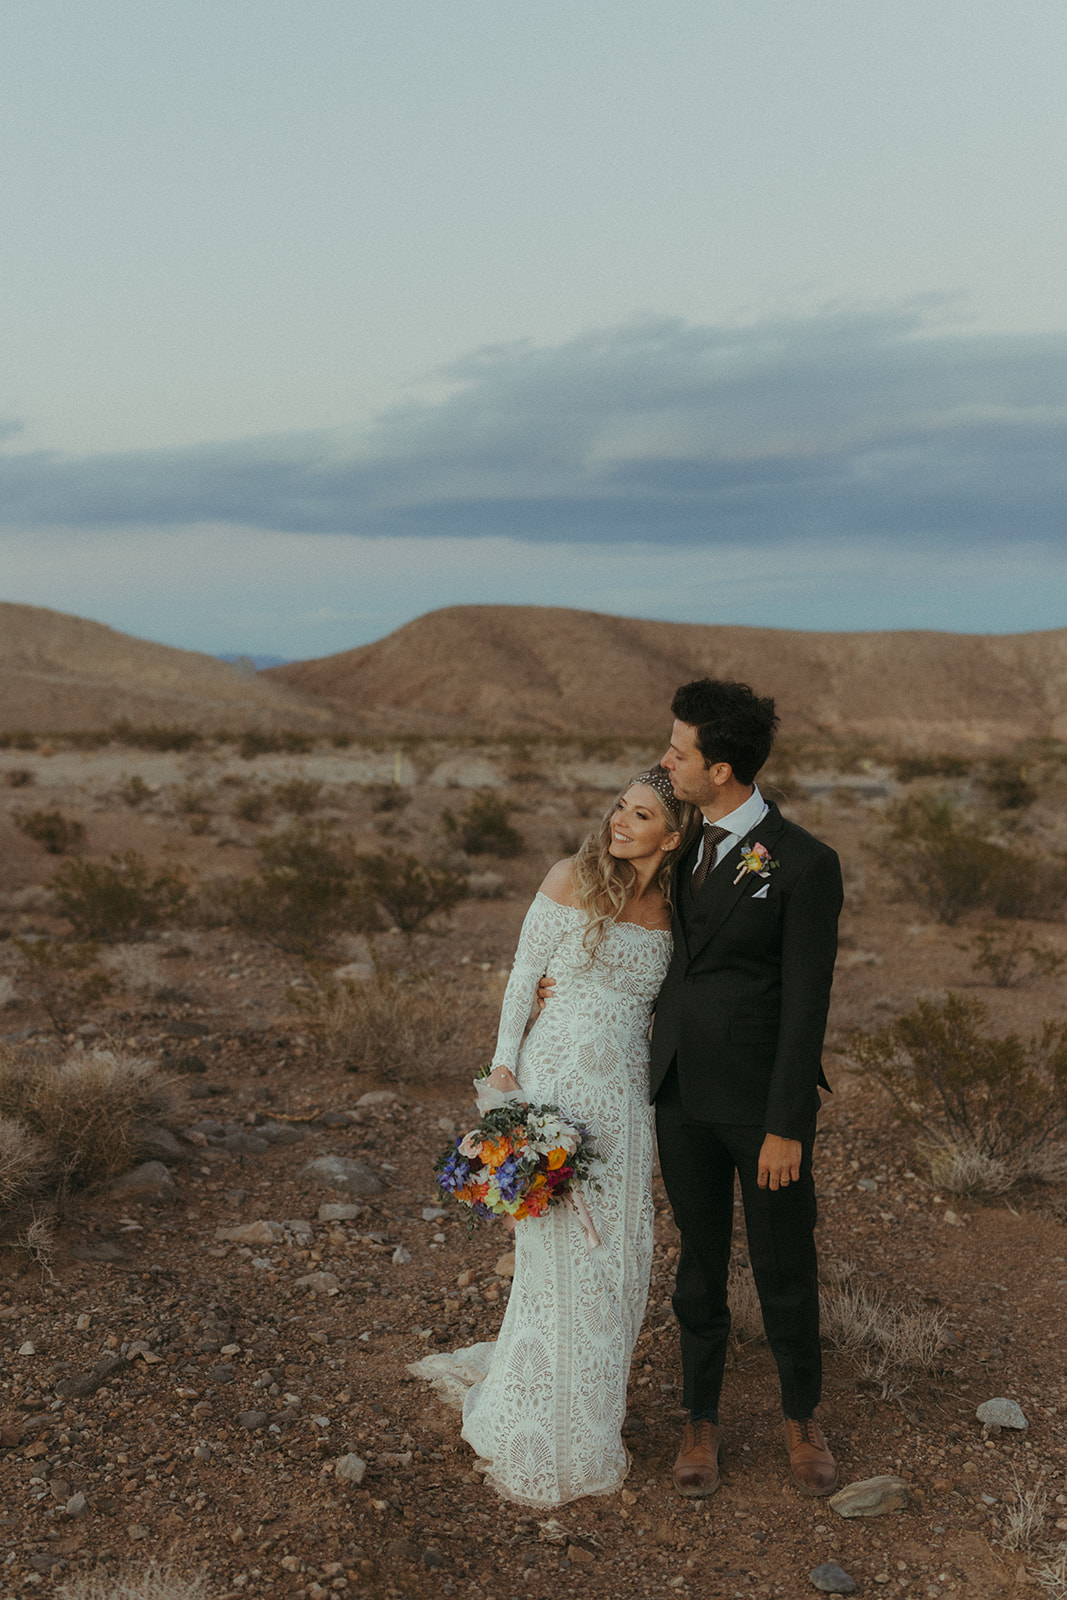 Newlyweds stand close together as they watch the sunset in desert love land